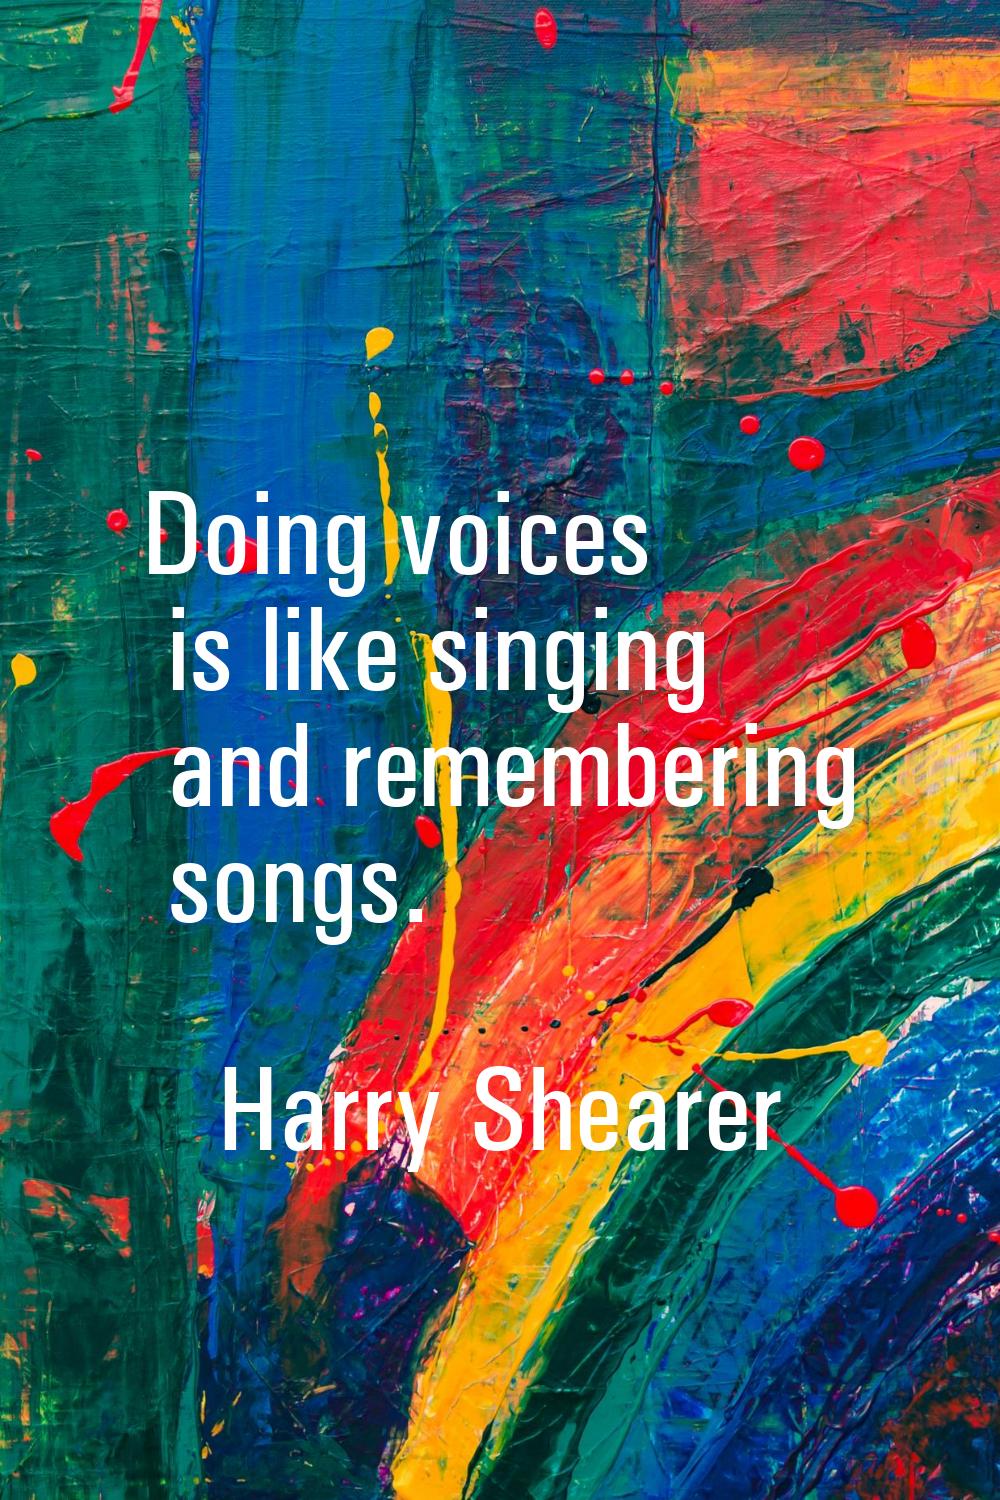 Doing voices is like singing and remembering songs.